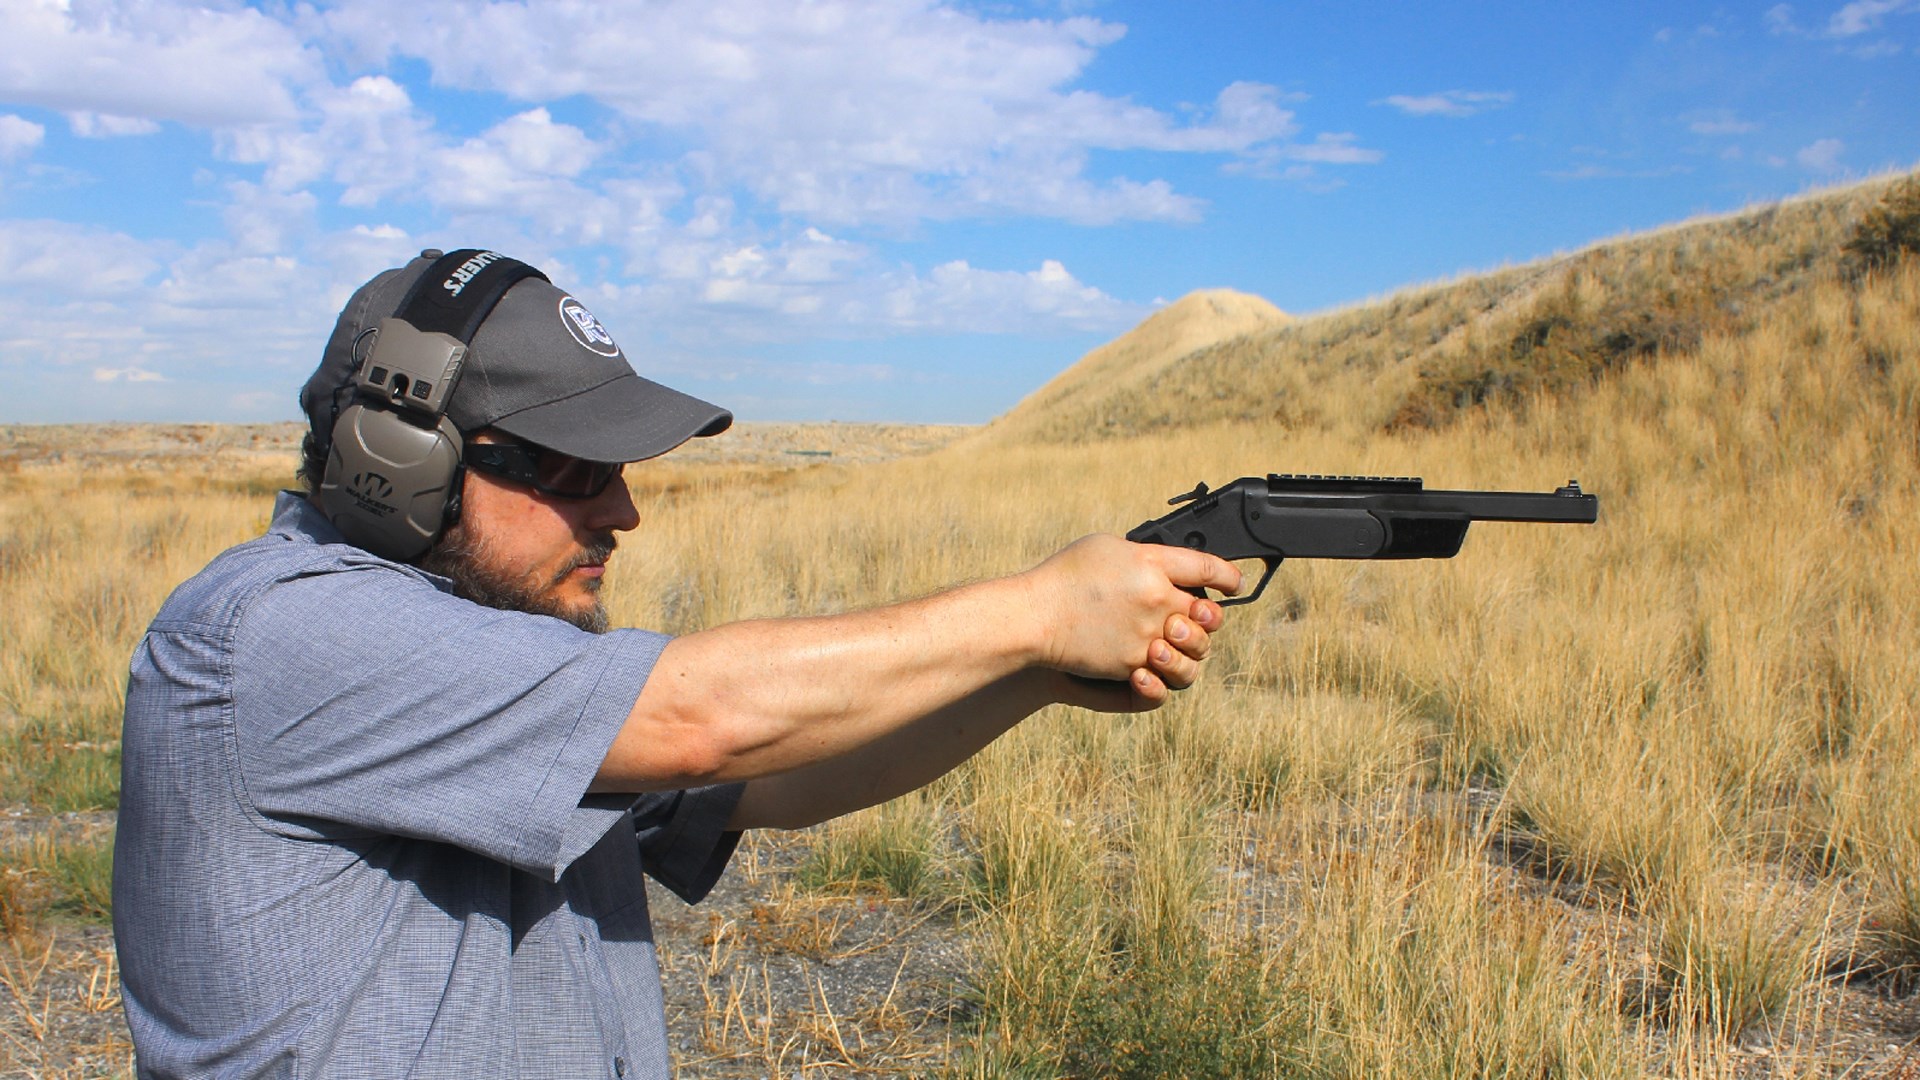 Man author wearing hat glasses and earmuffs outdoors holding shooting Rossi Brawler single-shot break-action hinge-action handgun pistol grass mountains blue sky clouds